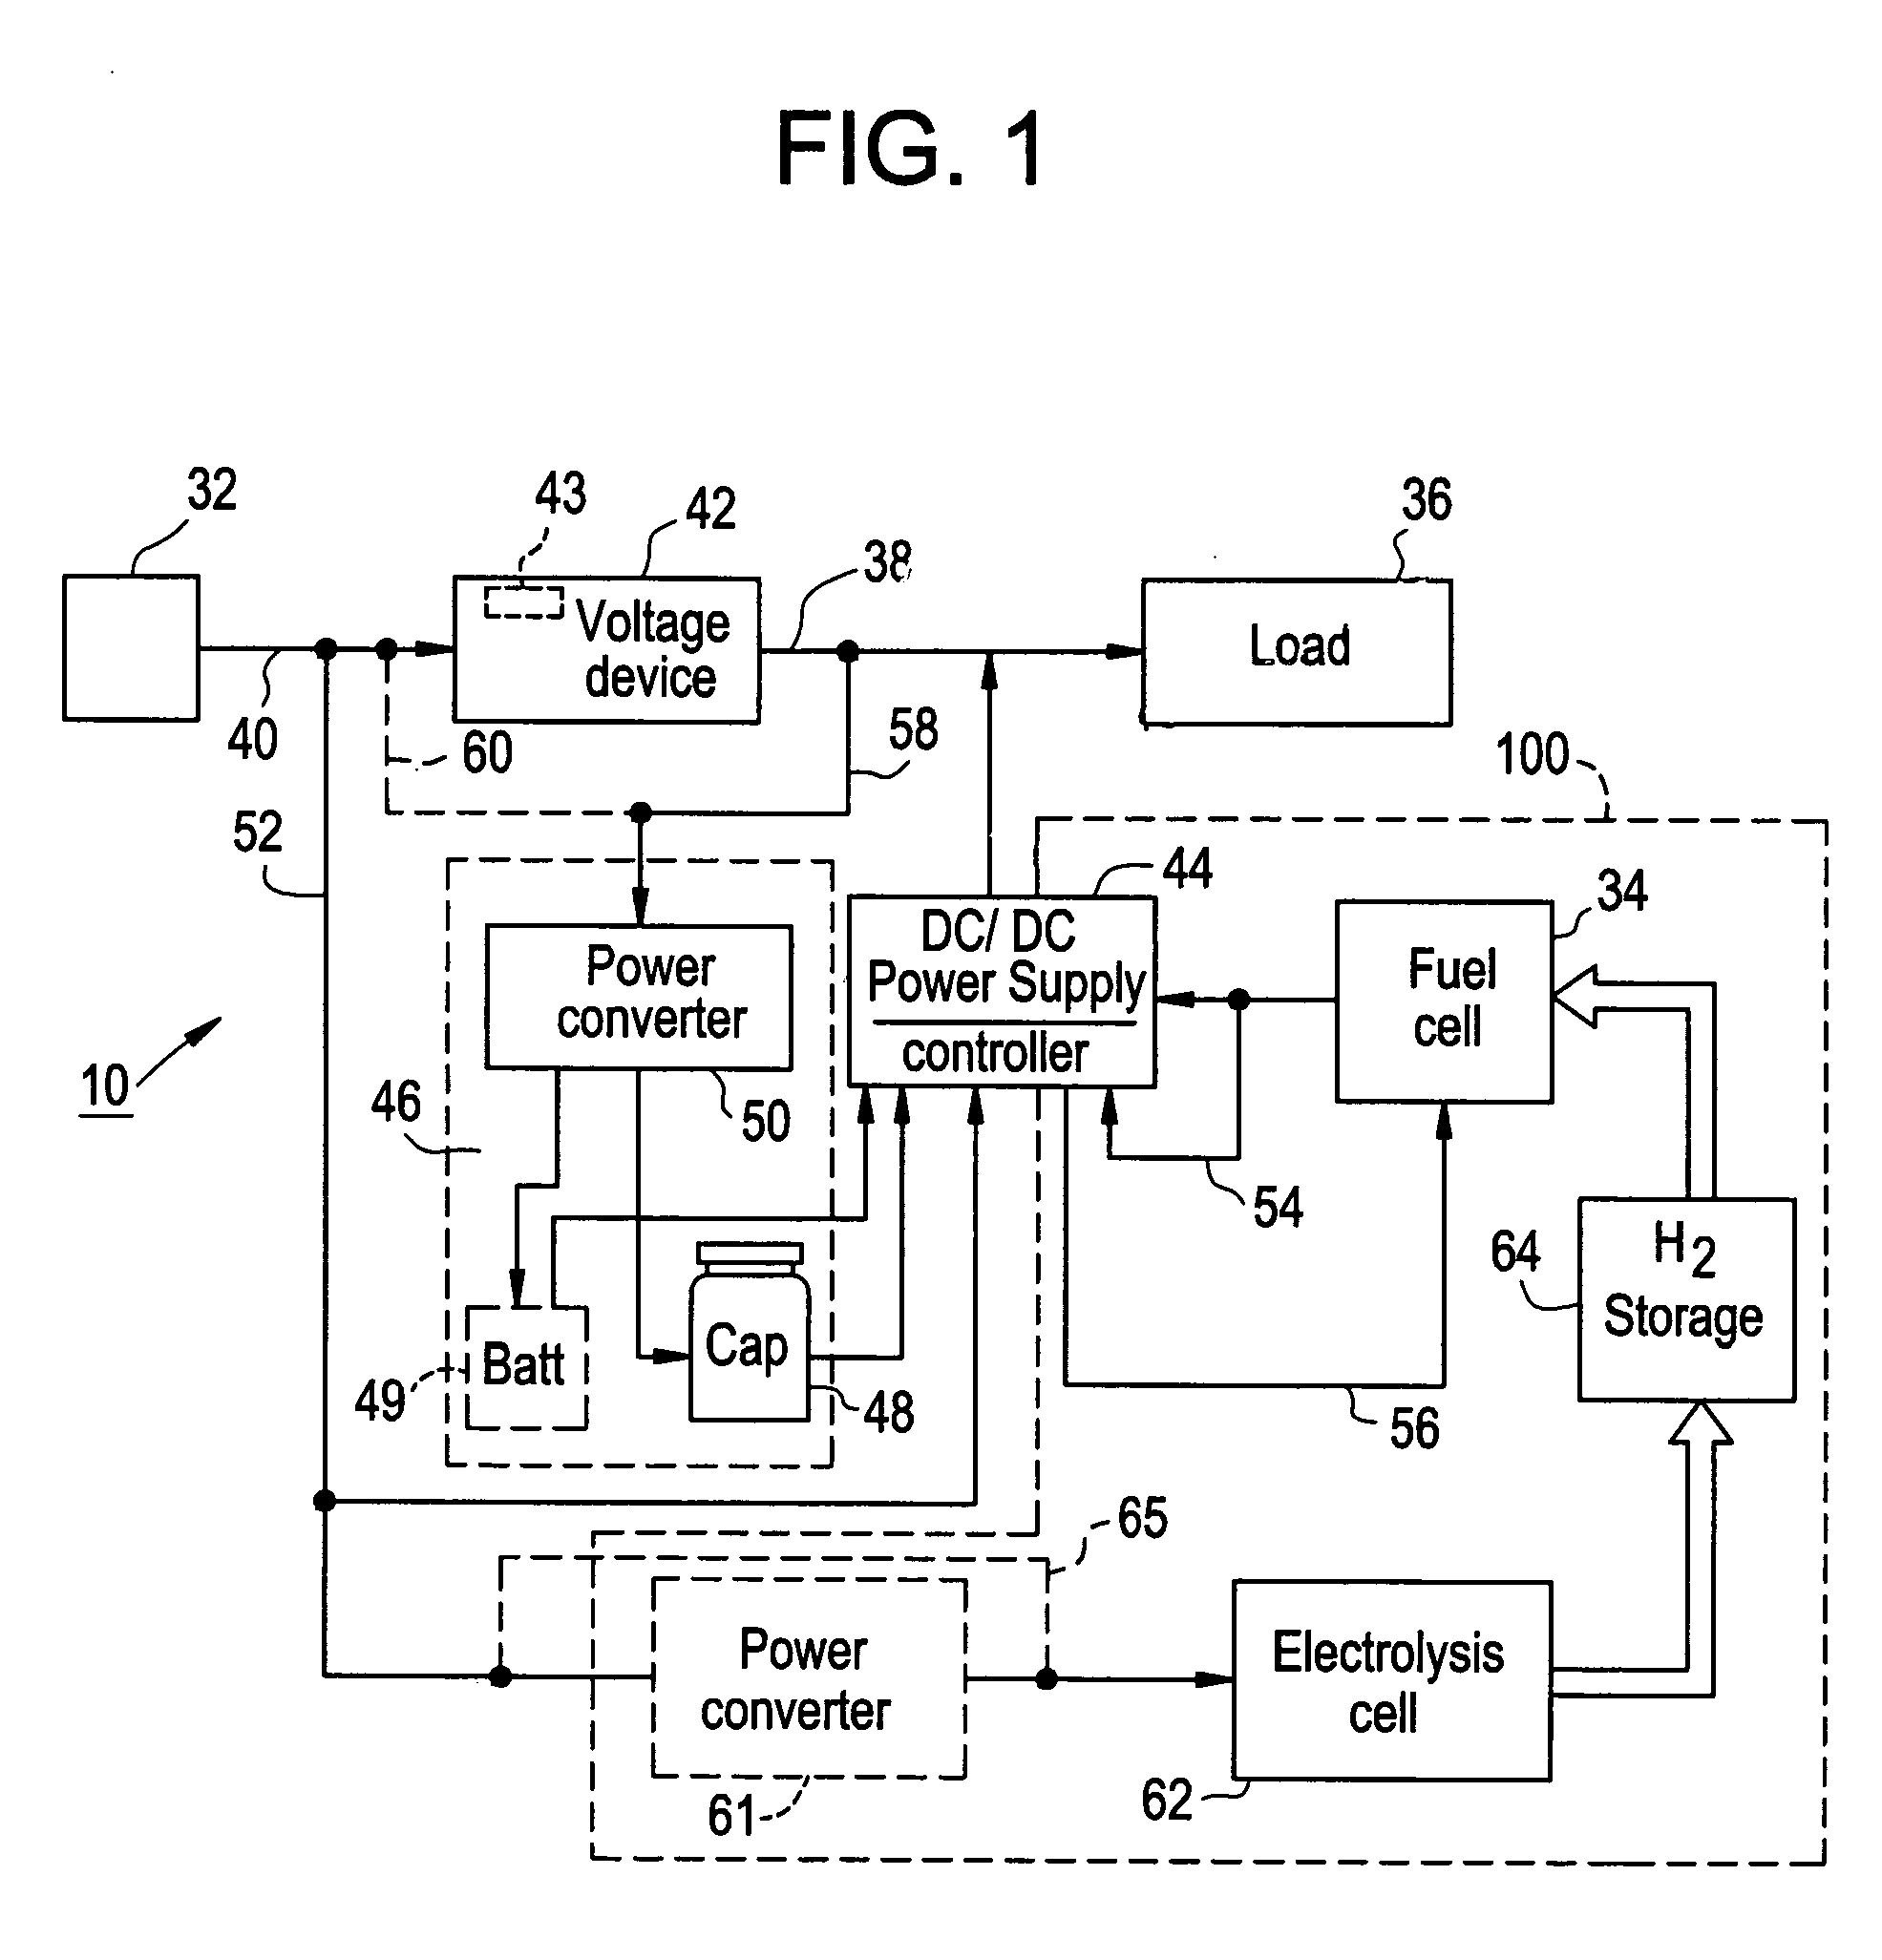 Method and system for controlling and recovering short duration bridge power to maximize backup power